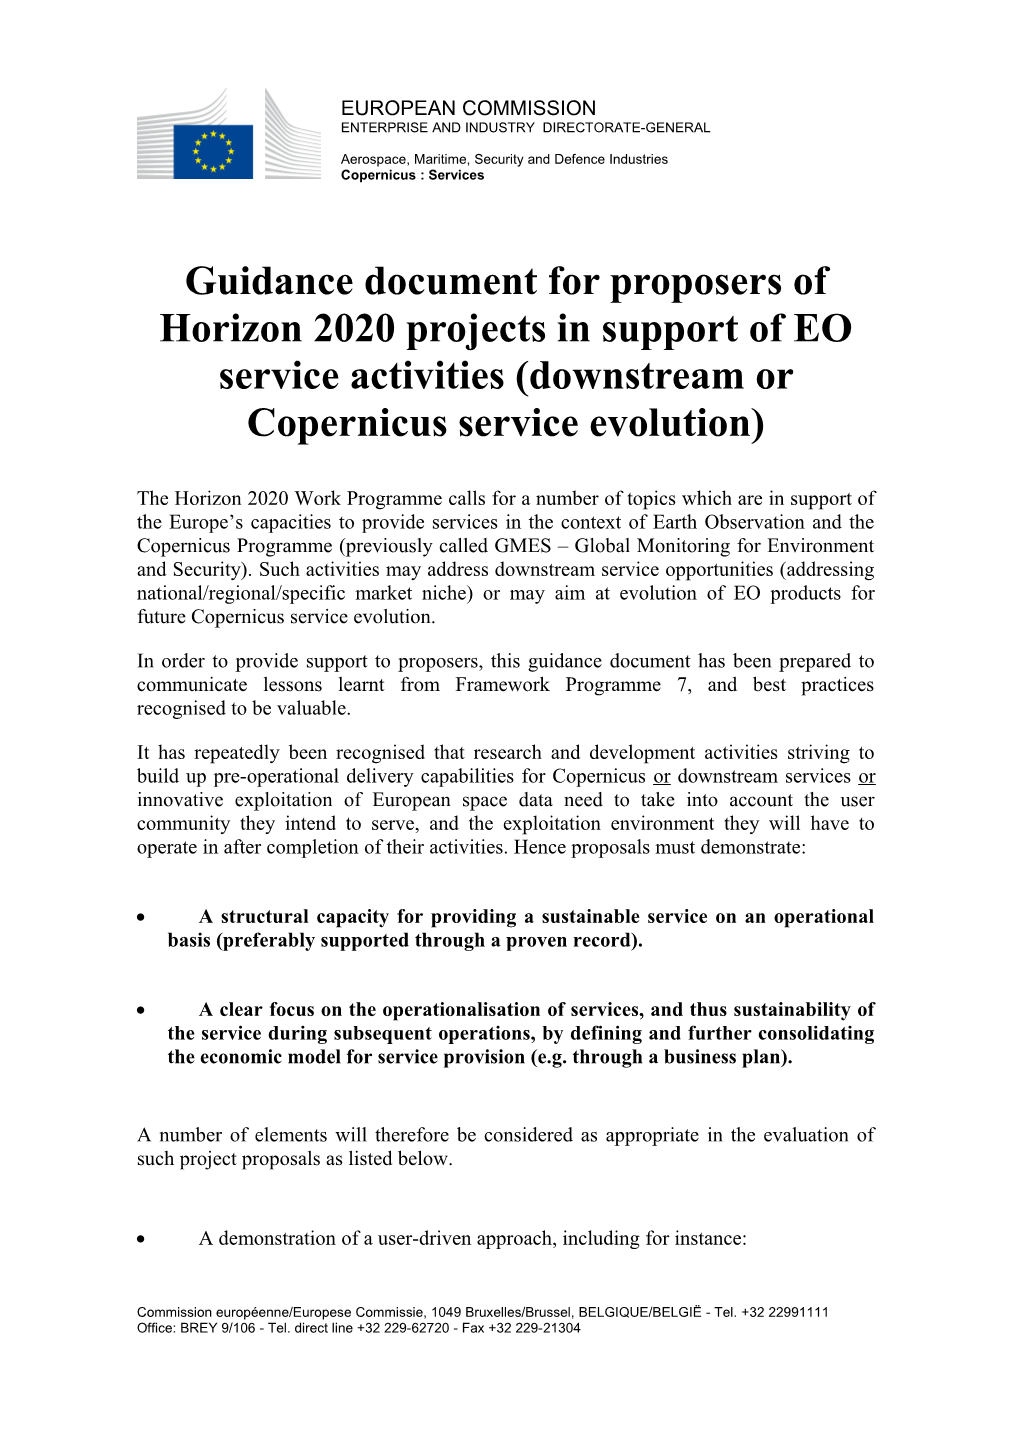 Guidance Document for Proposers of Horizon 2020 Projects in Support of EO Service Activities